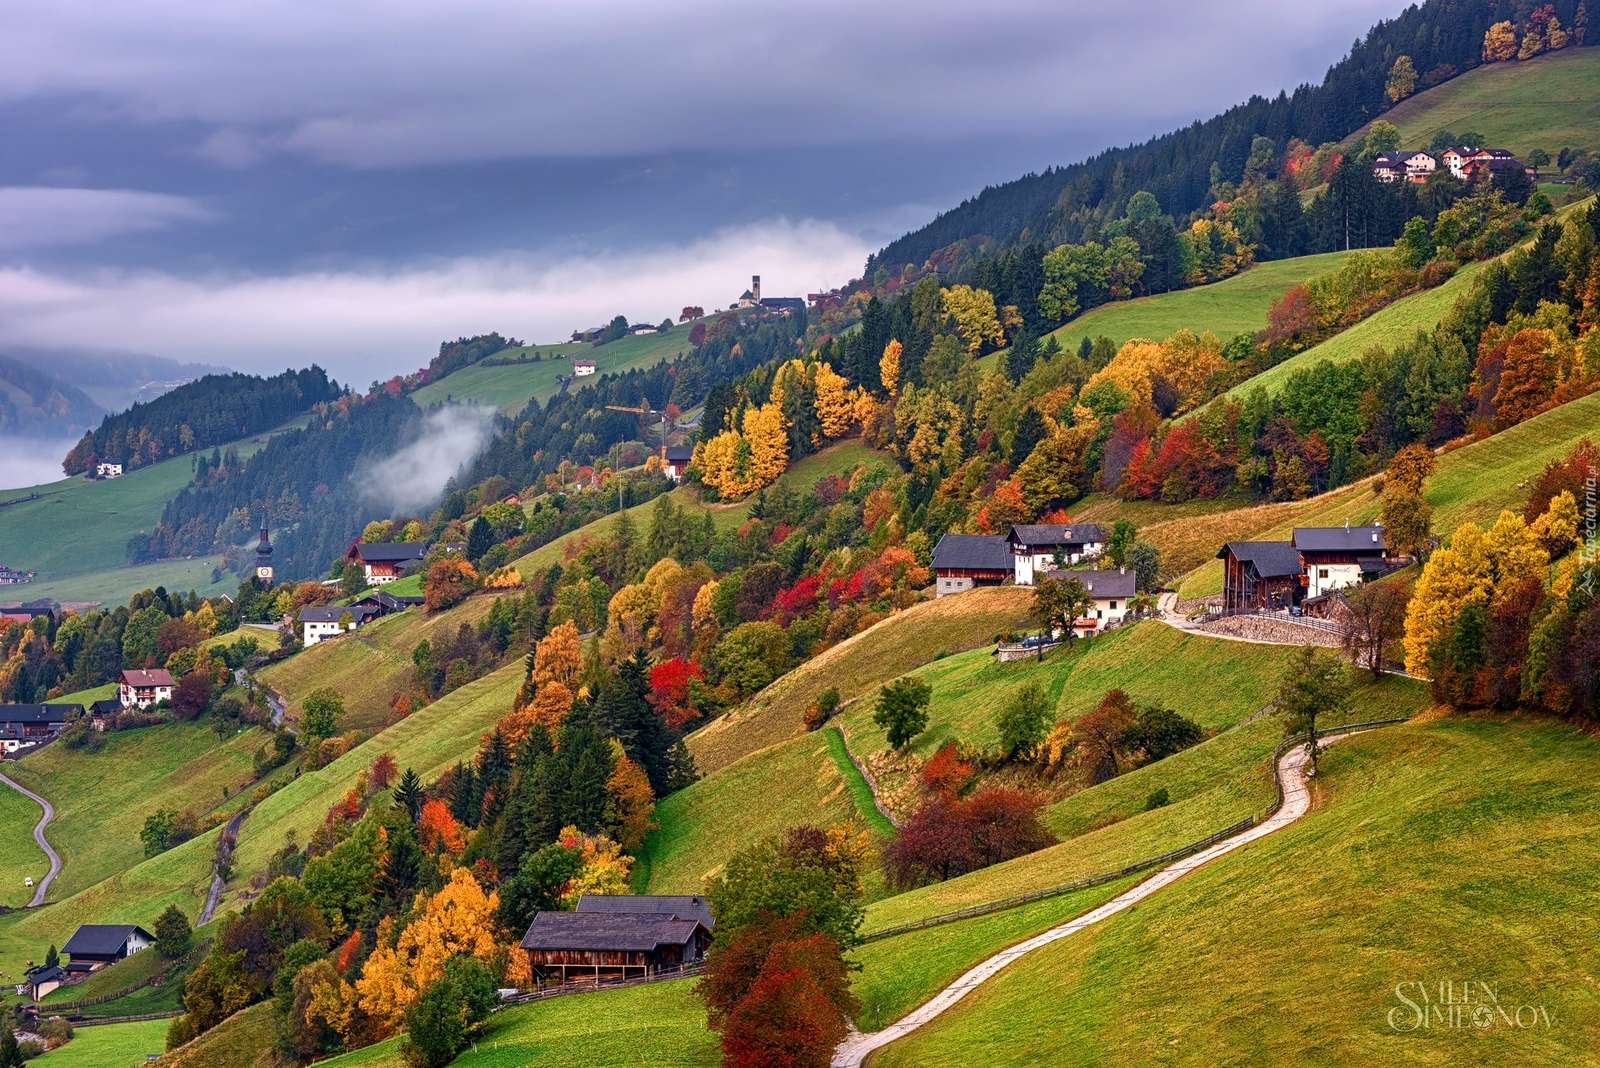 Autumn in the mountains. jigsaw puzzle